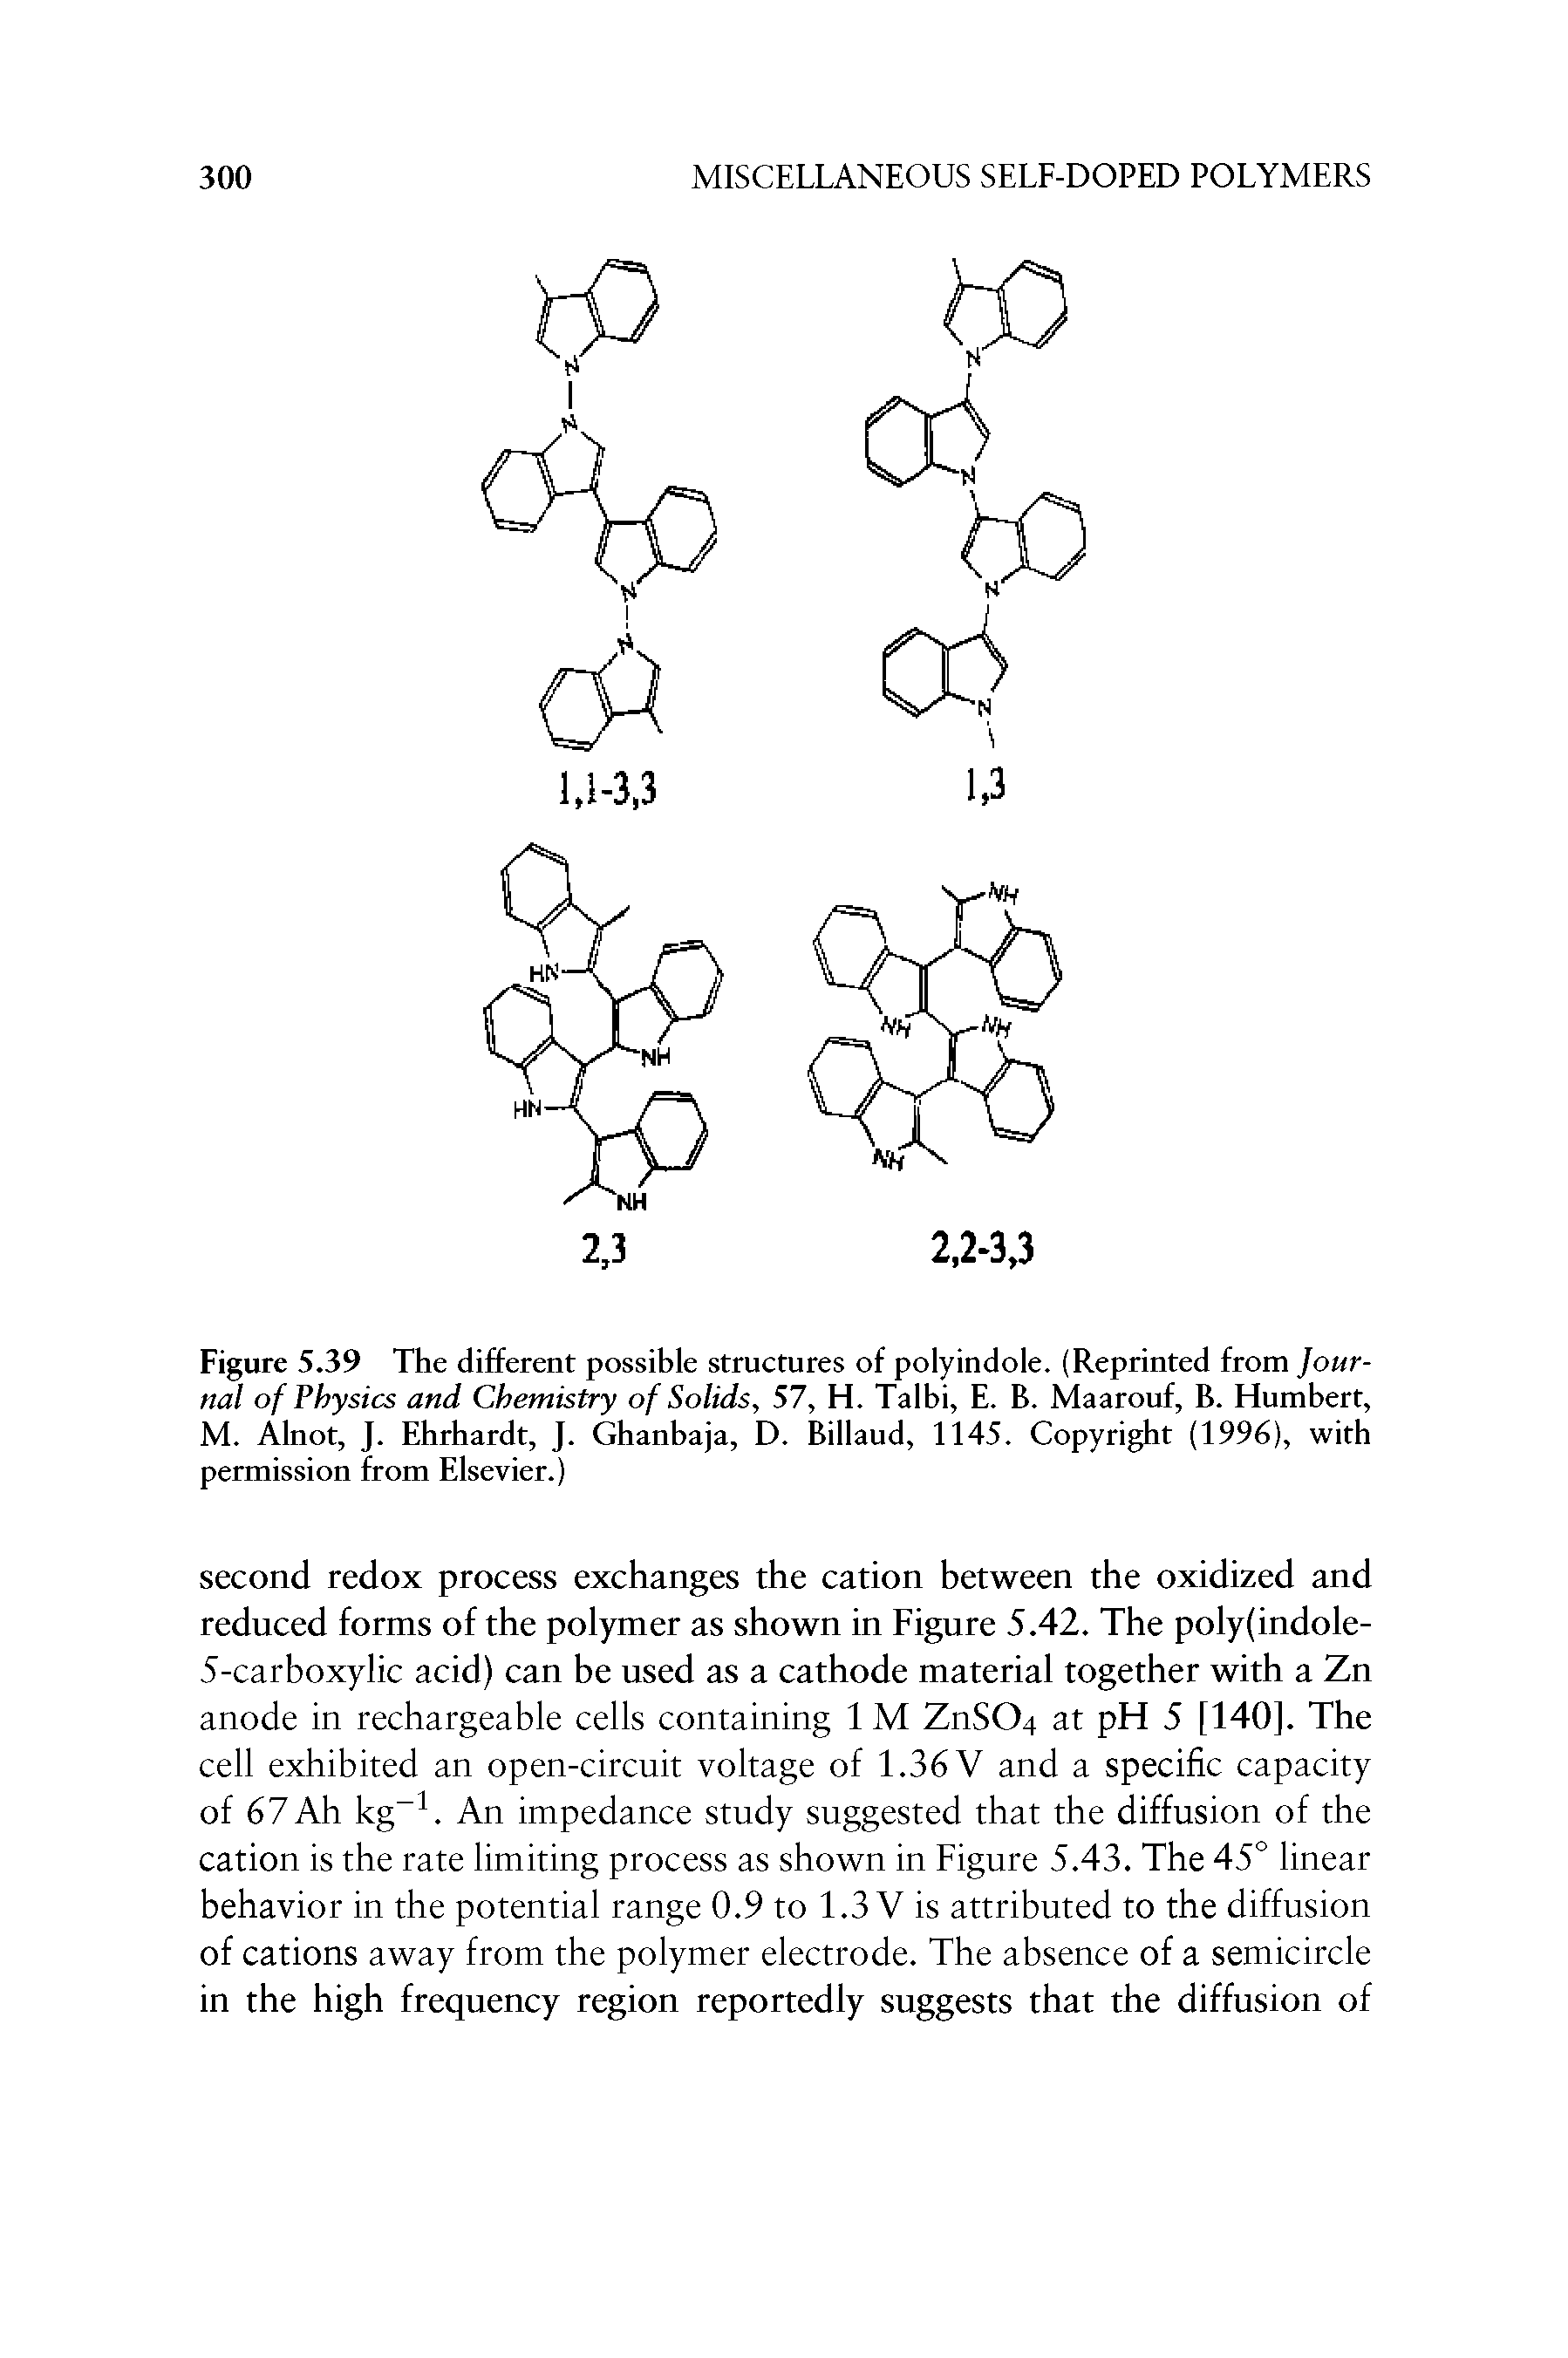 Figure 5.39 The different possible structures of poly indole. (Reprinted from Journal of Physics and Chemistry of Solids, 57, H. Talbi, E. B. Maarouf, B. Humbert, M. Alnot, J. Ehrhardt, J. Ghanbaja, D. Billaud, 1145. Copyright (1996), with permission from Elsevier.)...